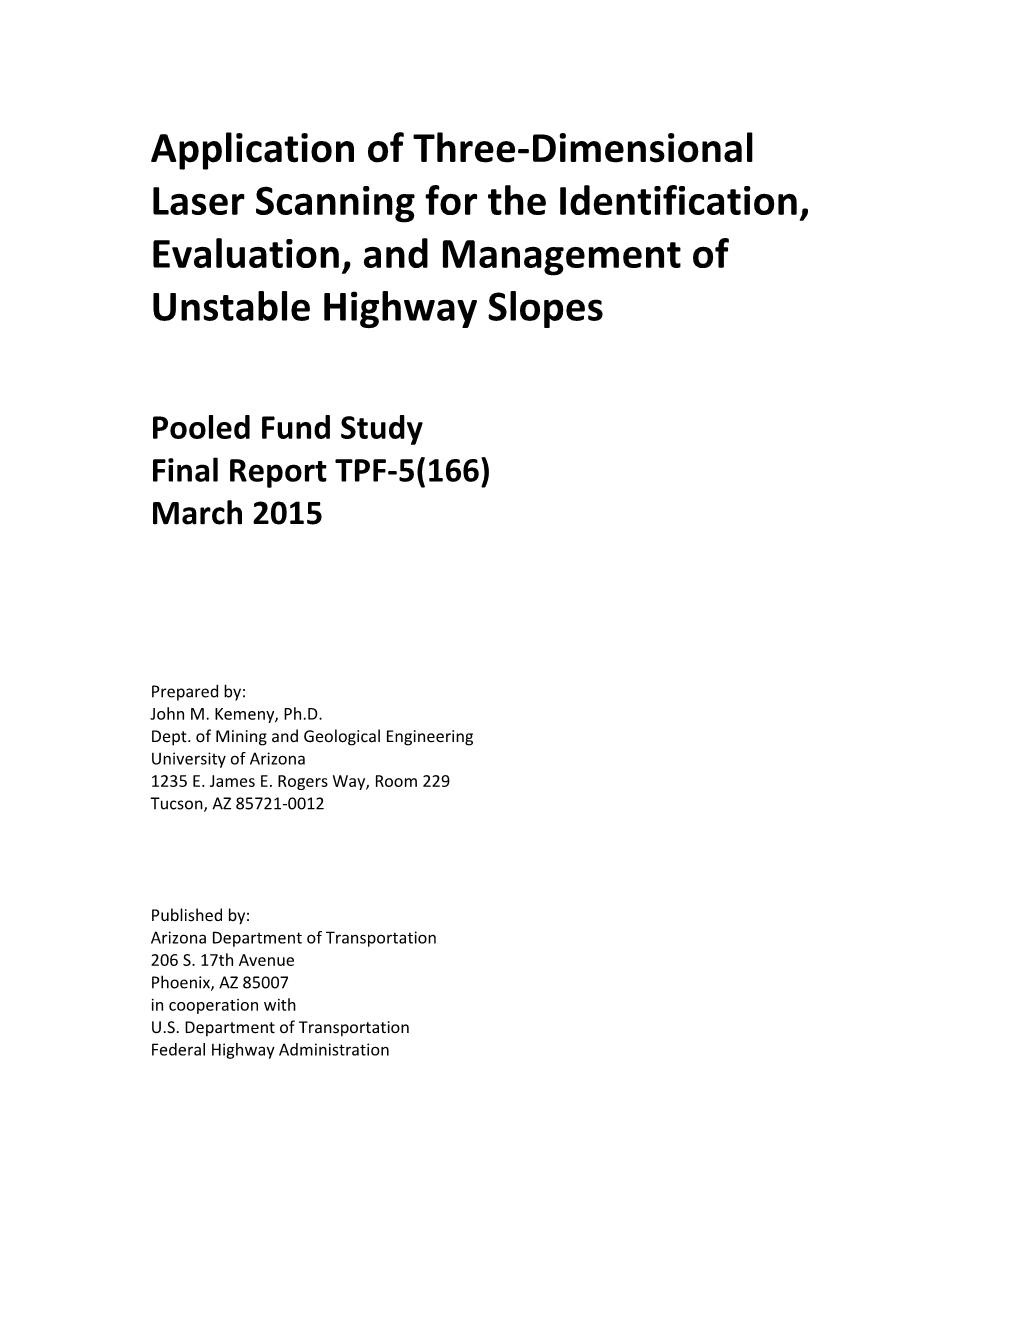 Application of Three-Dimensional Laser Scanning for the Identification, Evaluation, and Management of Unstable Highway Slopes